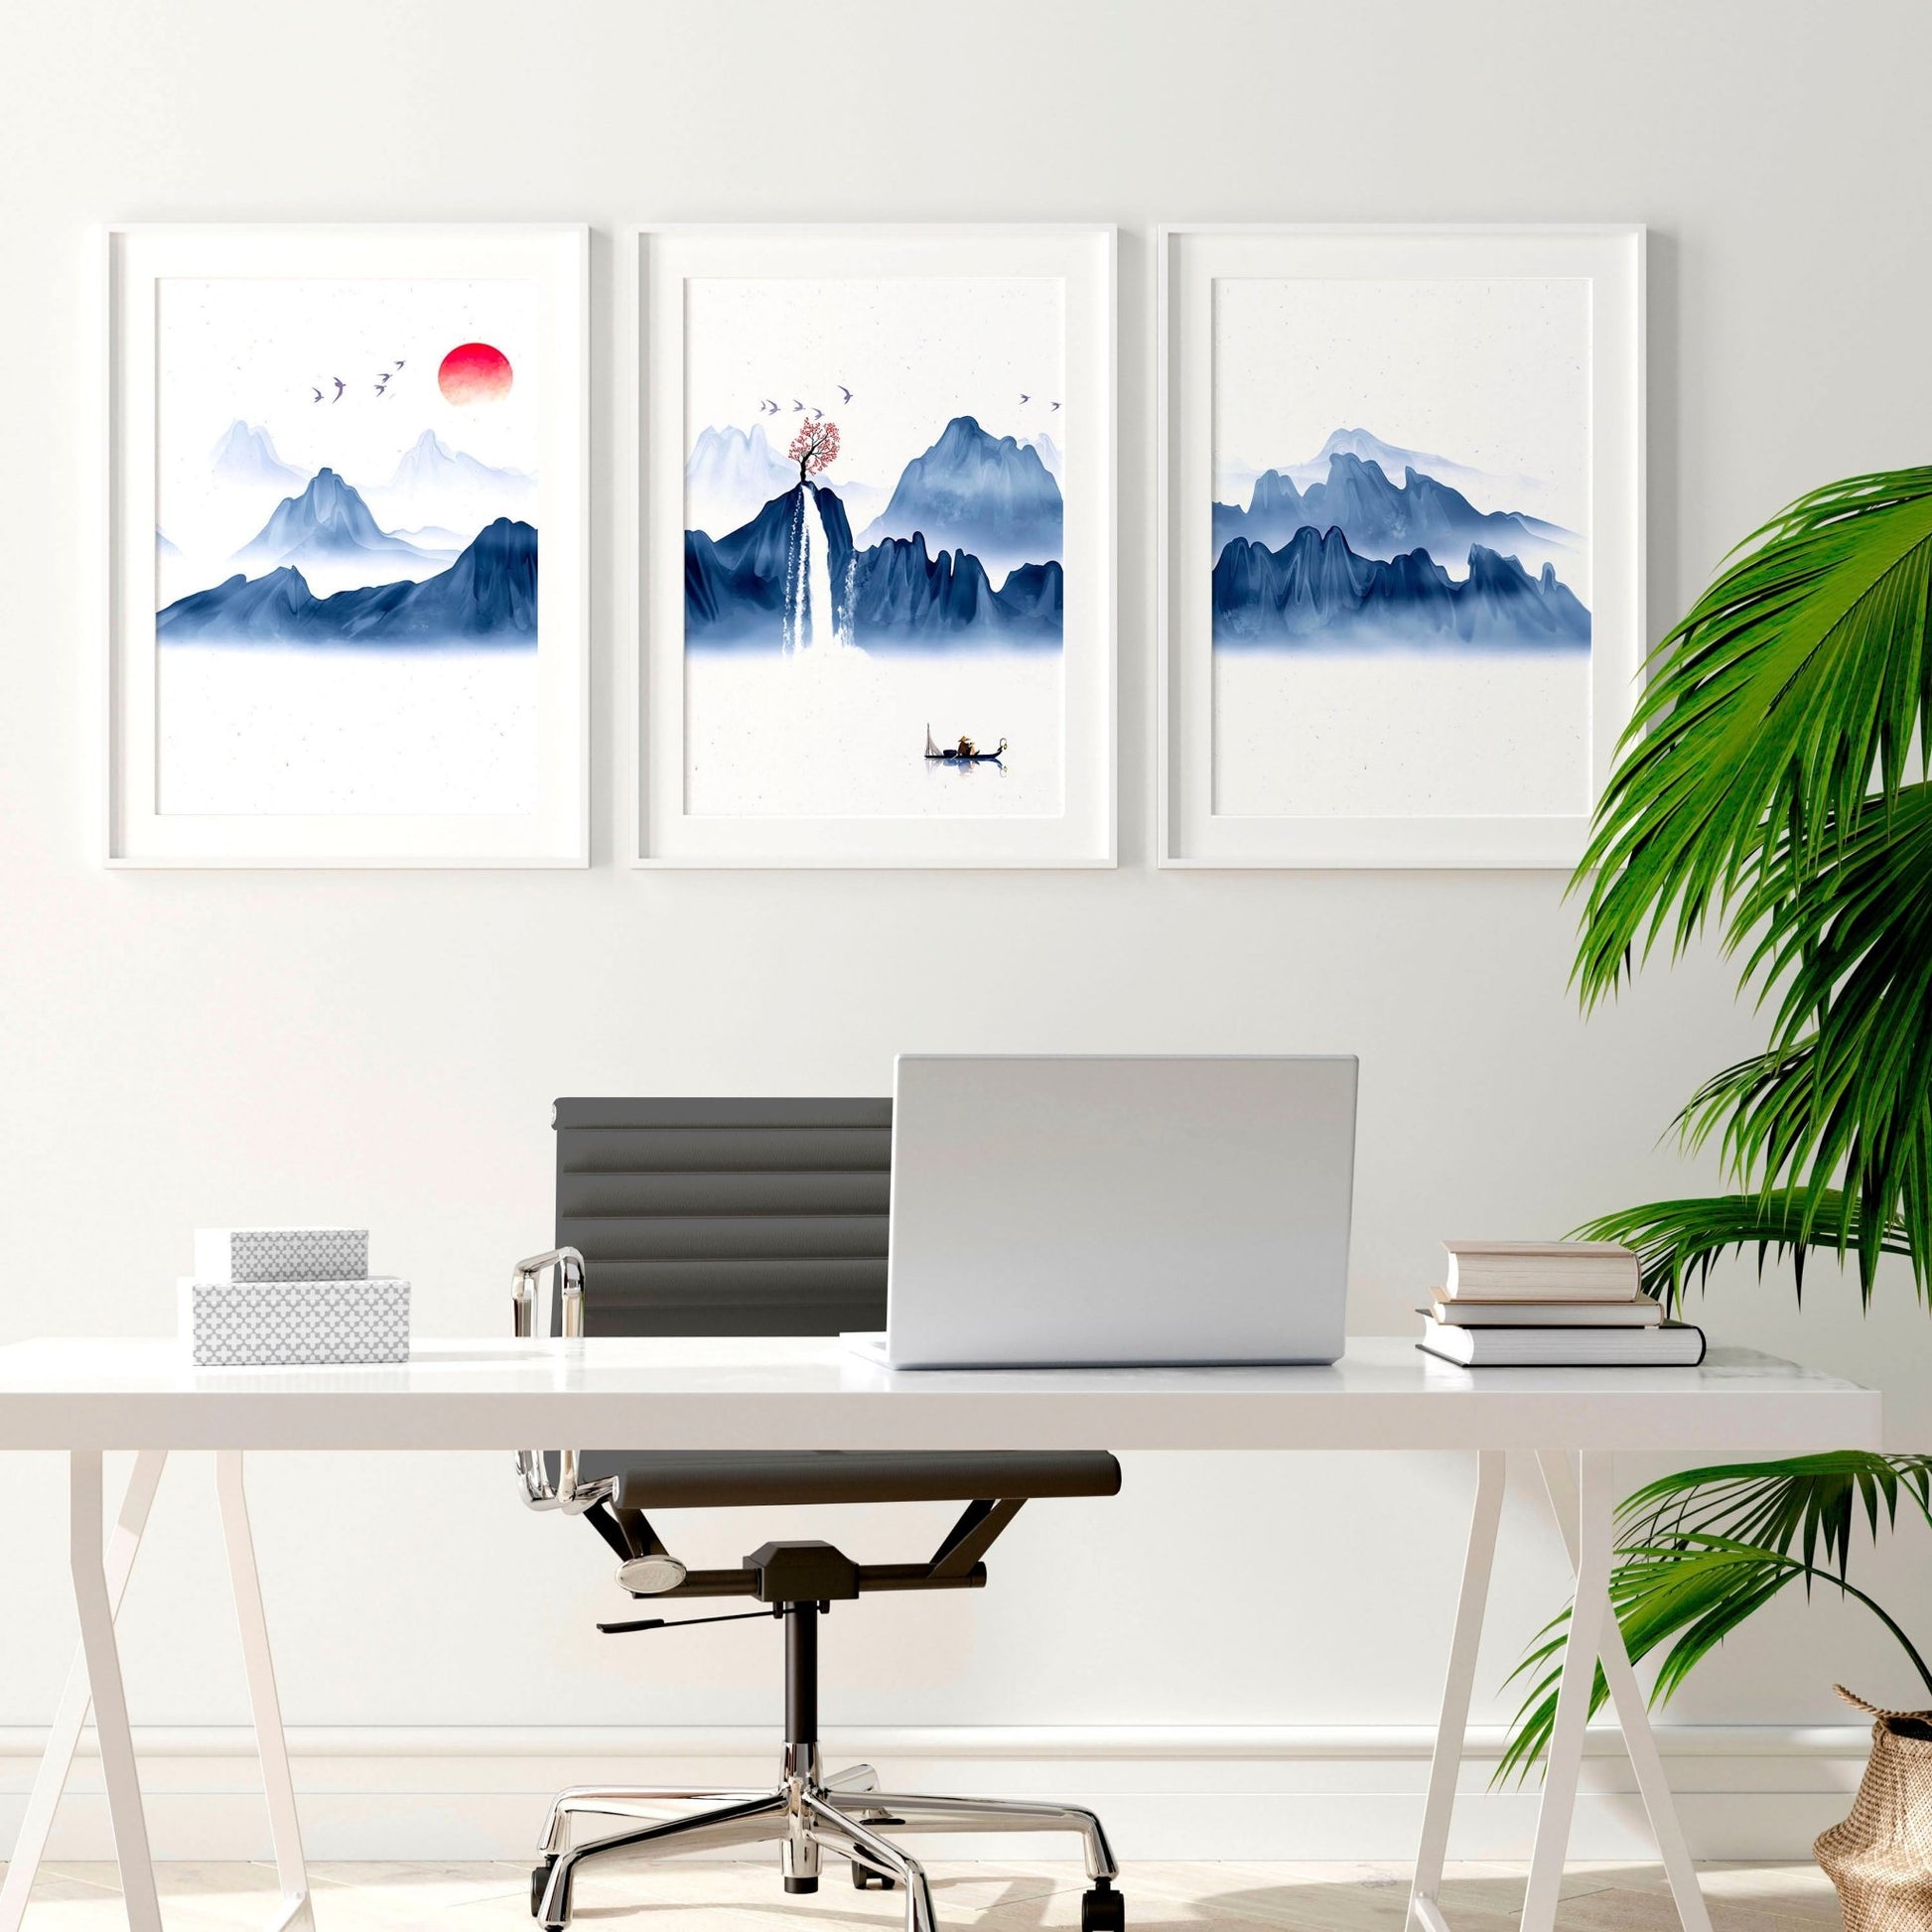 Pictures for the office walls | set of 3 wall art prints - About Wall Art